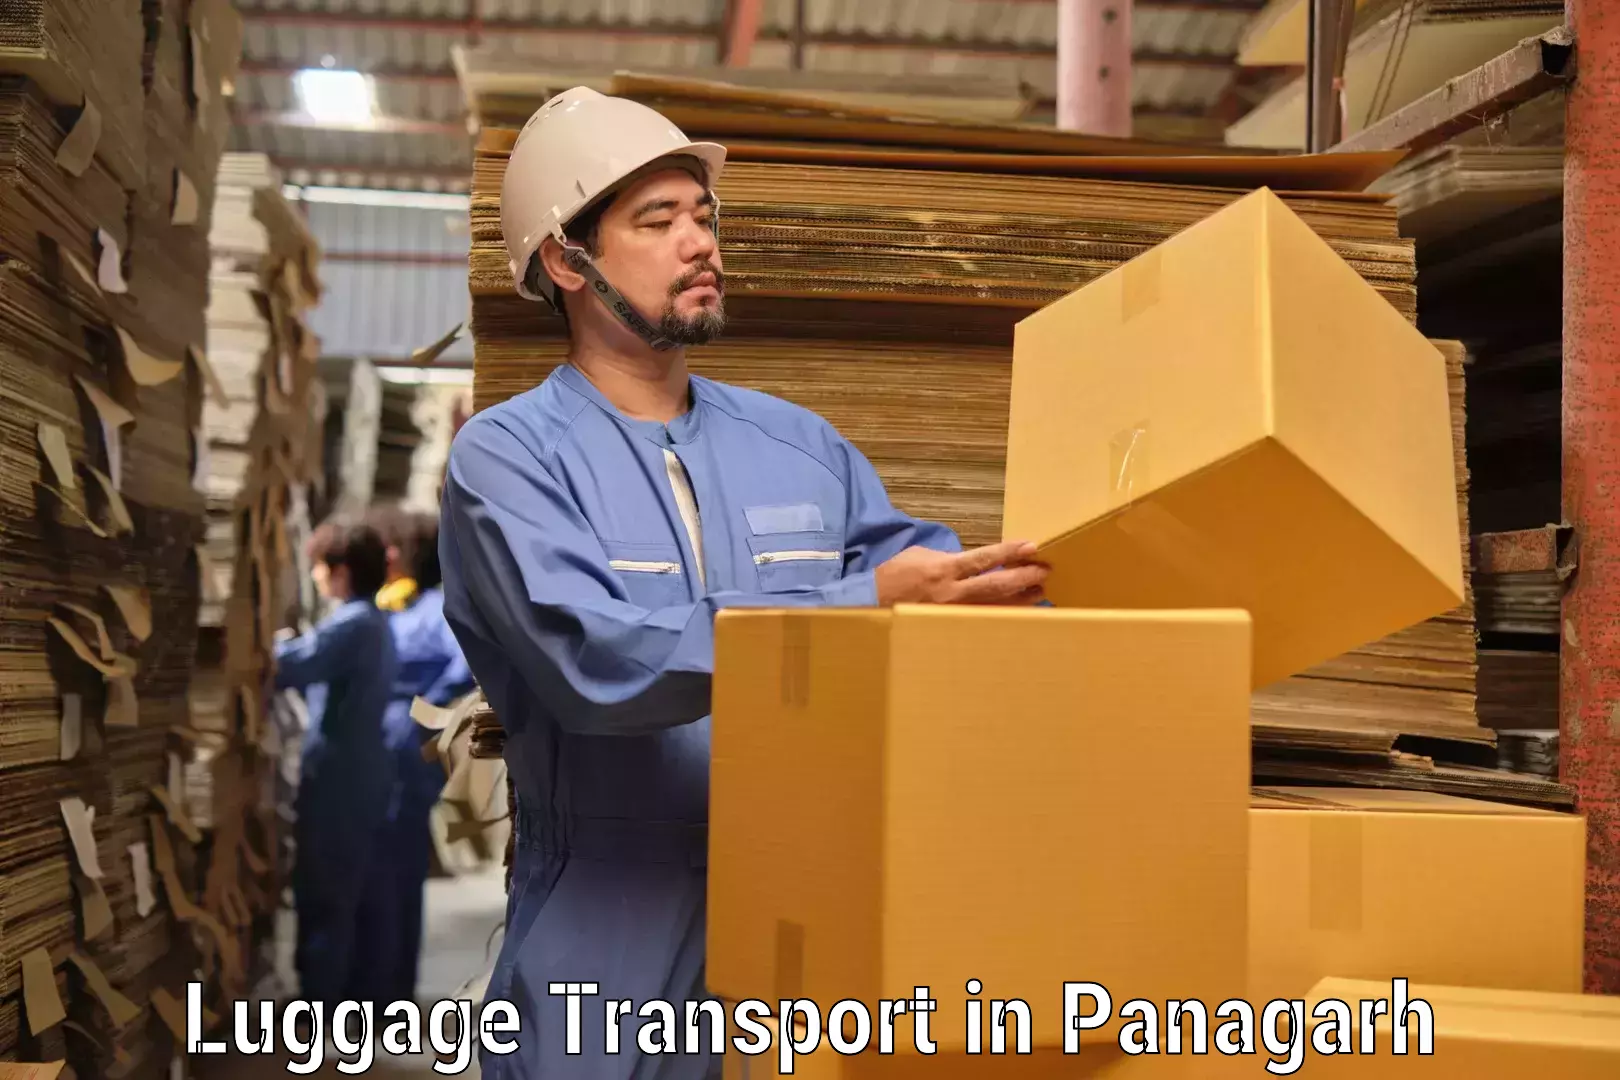 Luggage storage and delivery in Panagarh